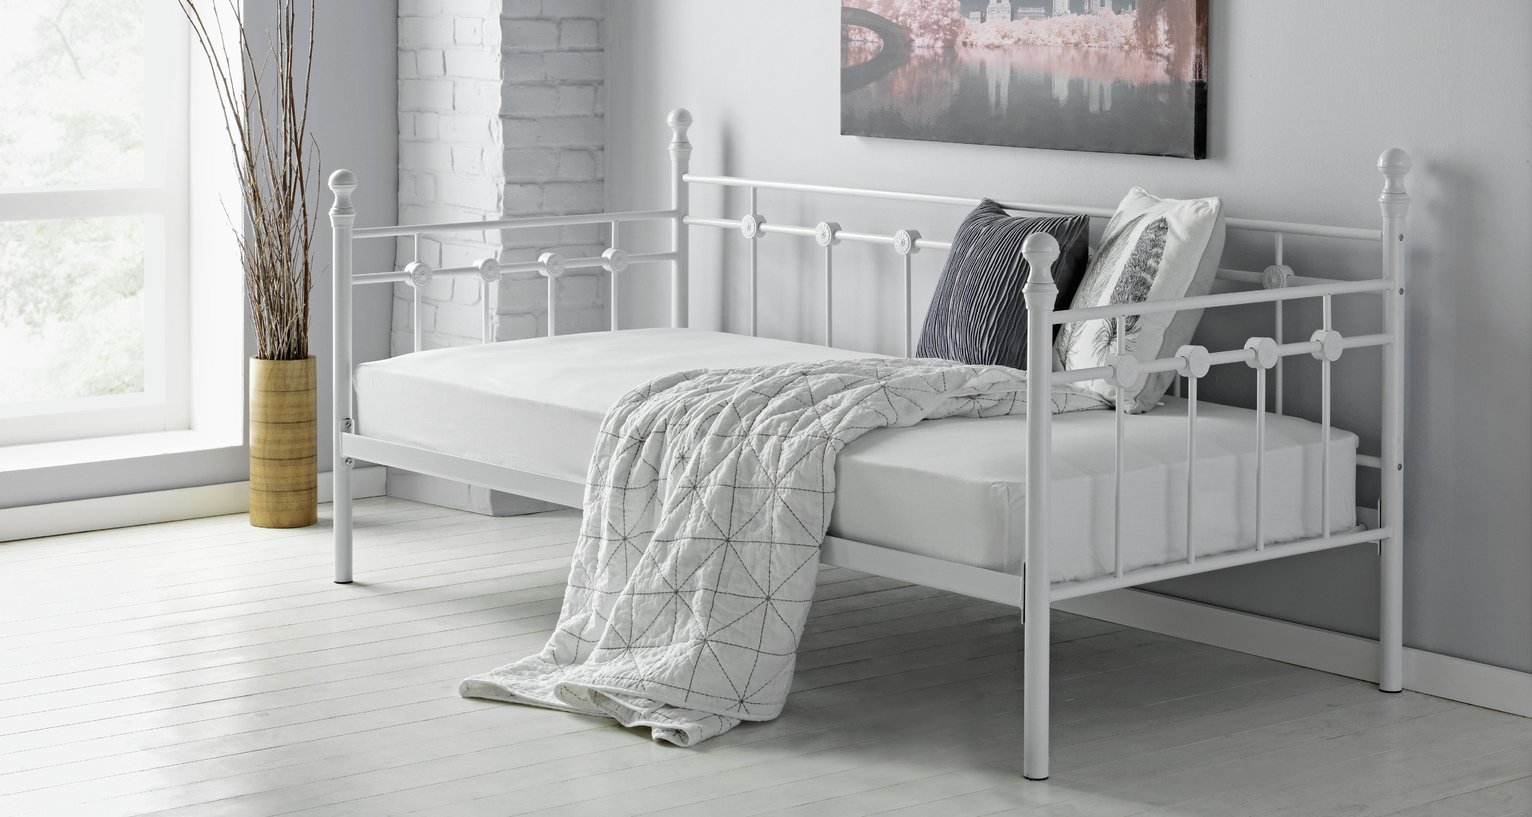 Argos Home Abigail Metal Day Bed and Mattress - White